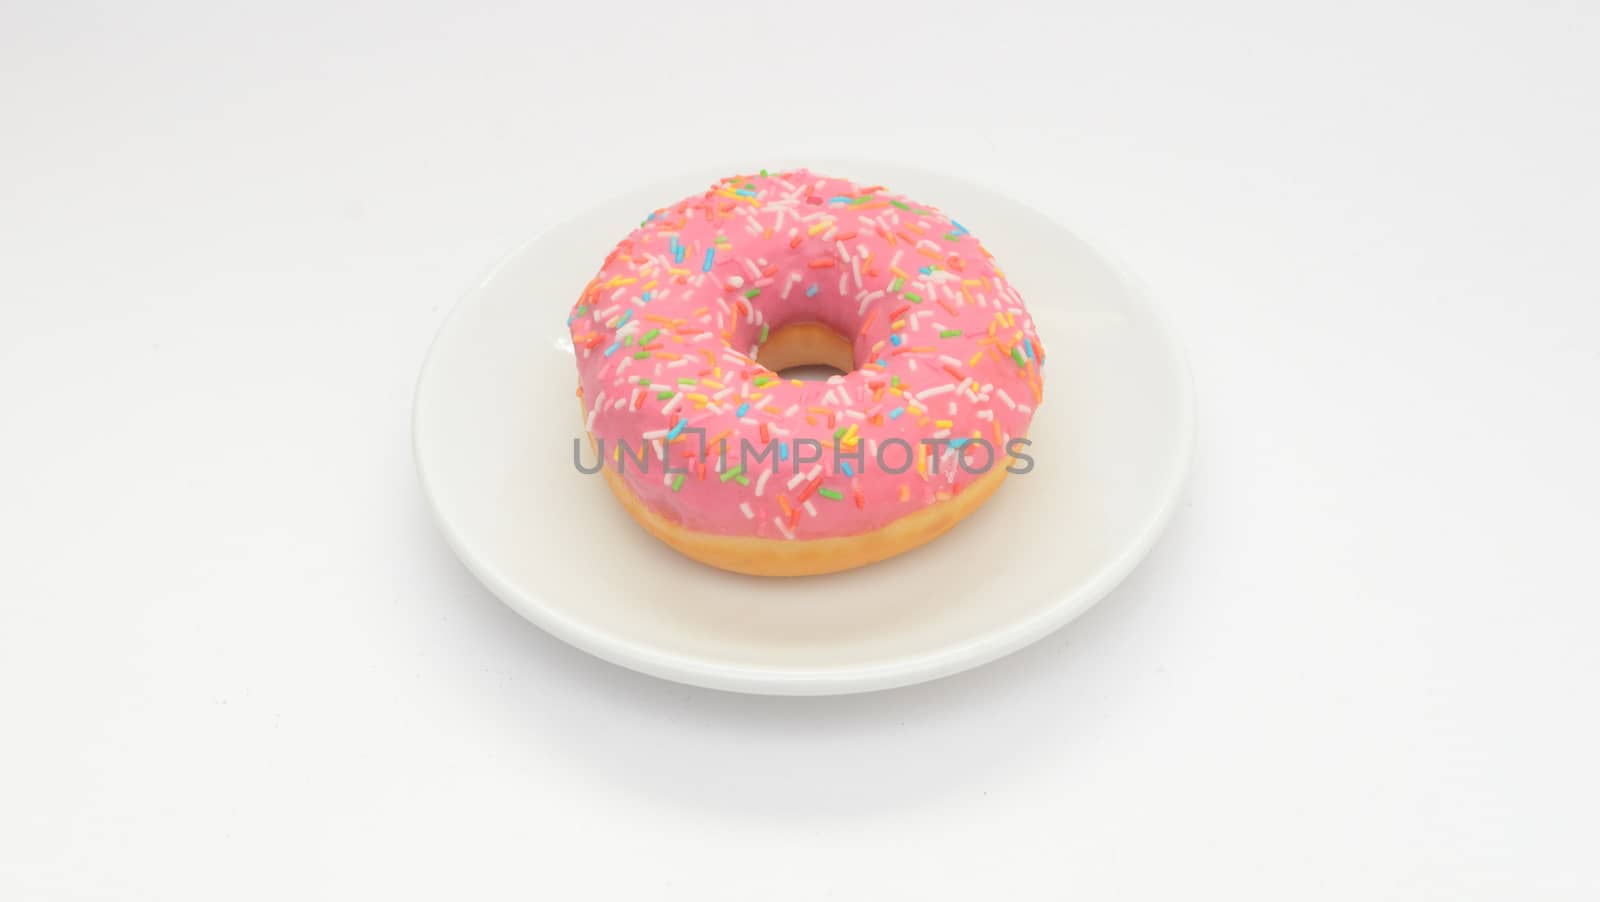 One pink glazed donut on plate on white background.Sweet dessert food for snack. 